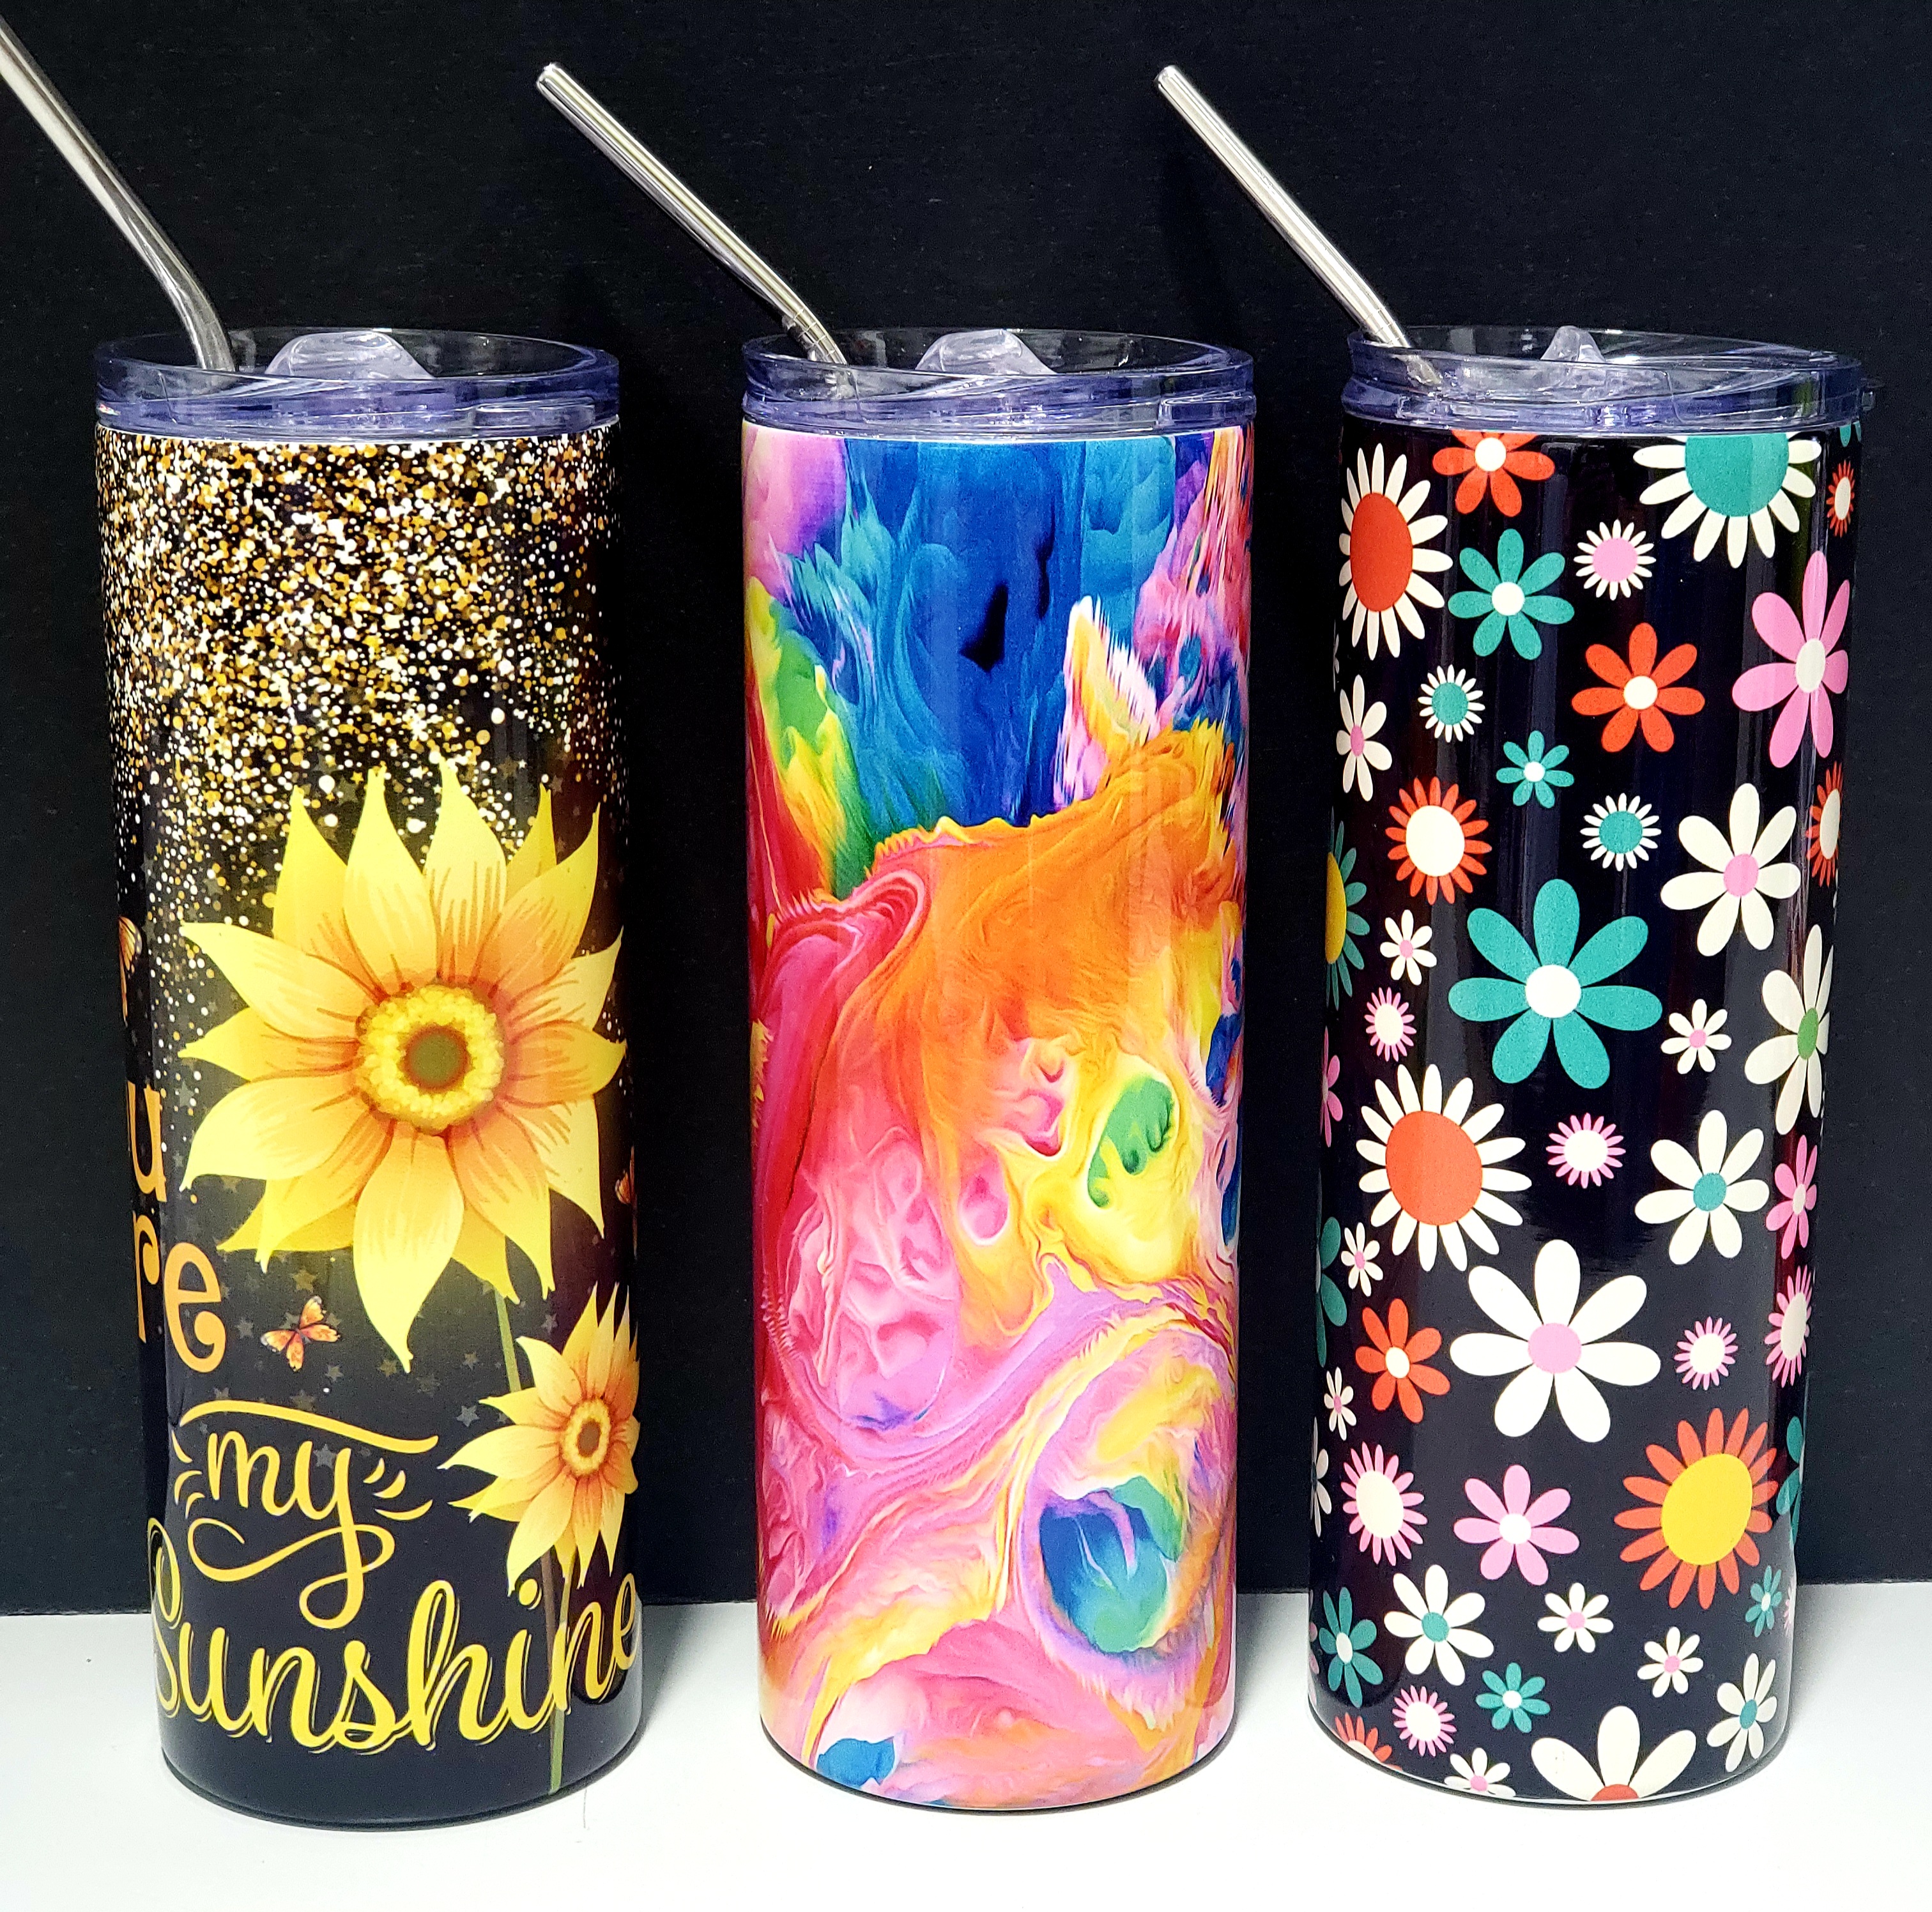 These cups are amazing!  I love to play with vibrant colors. 